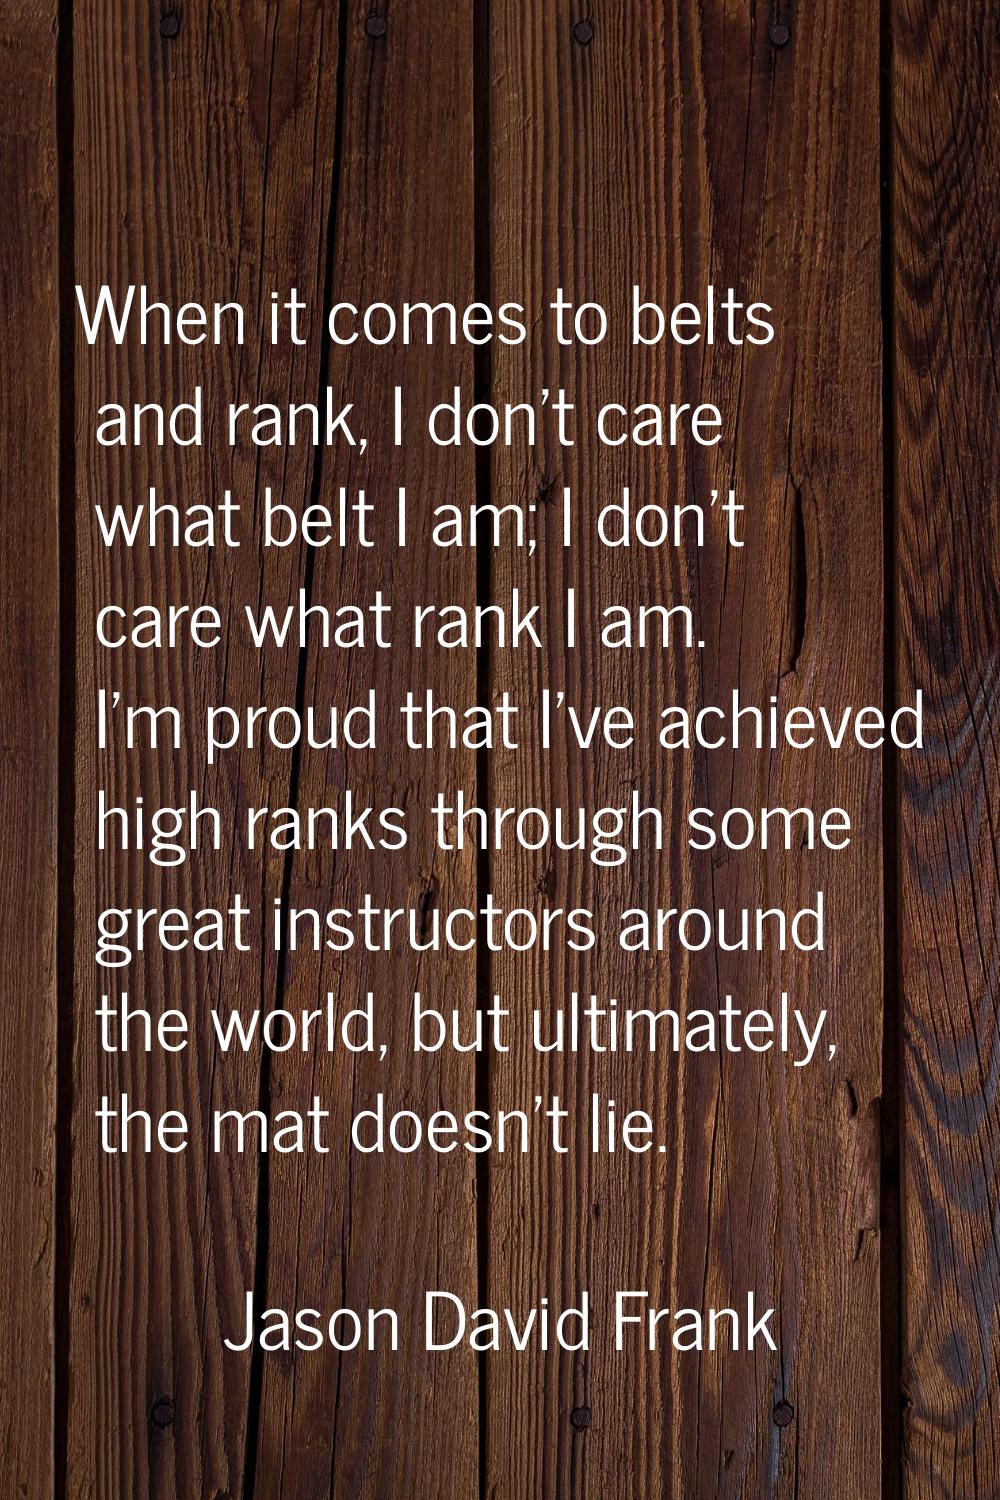 When it comes to belts and rank, I don't care what belt I am; I don't care what rank I am. I'm prou